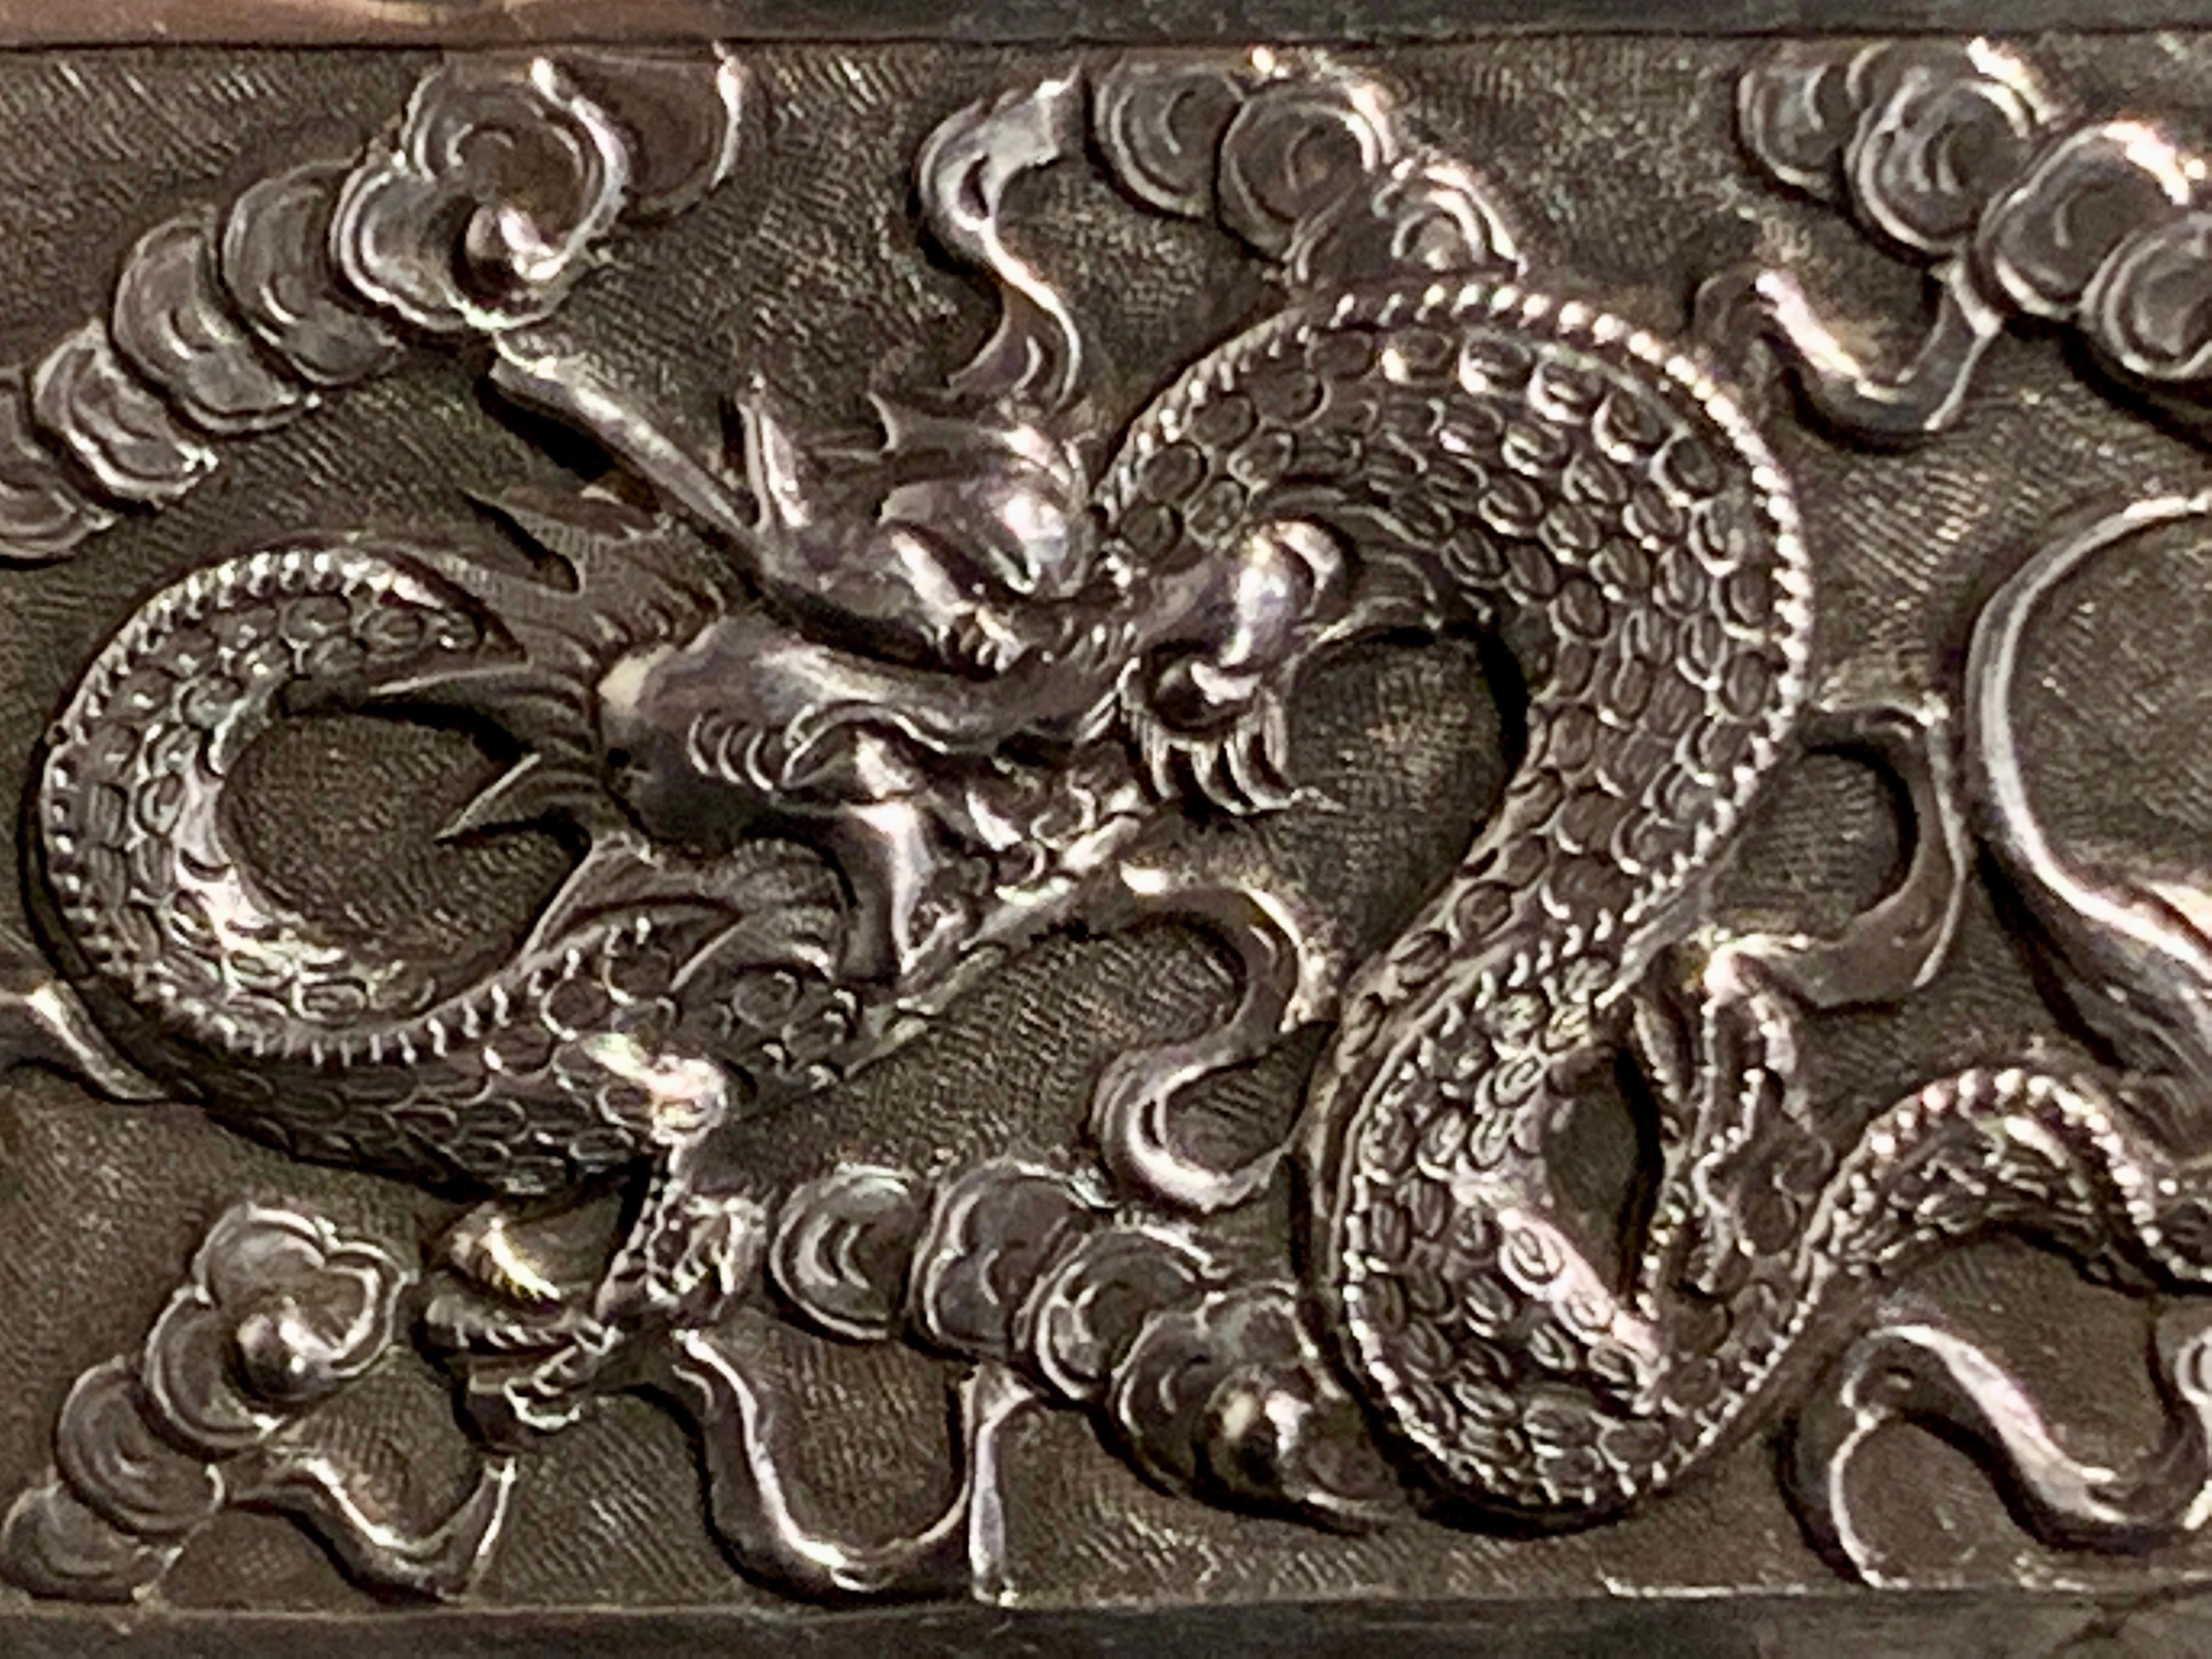 Repoussé Chinese Export Silver Matchbox Cover by Hone Wo, Early 20th Century